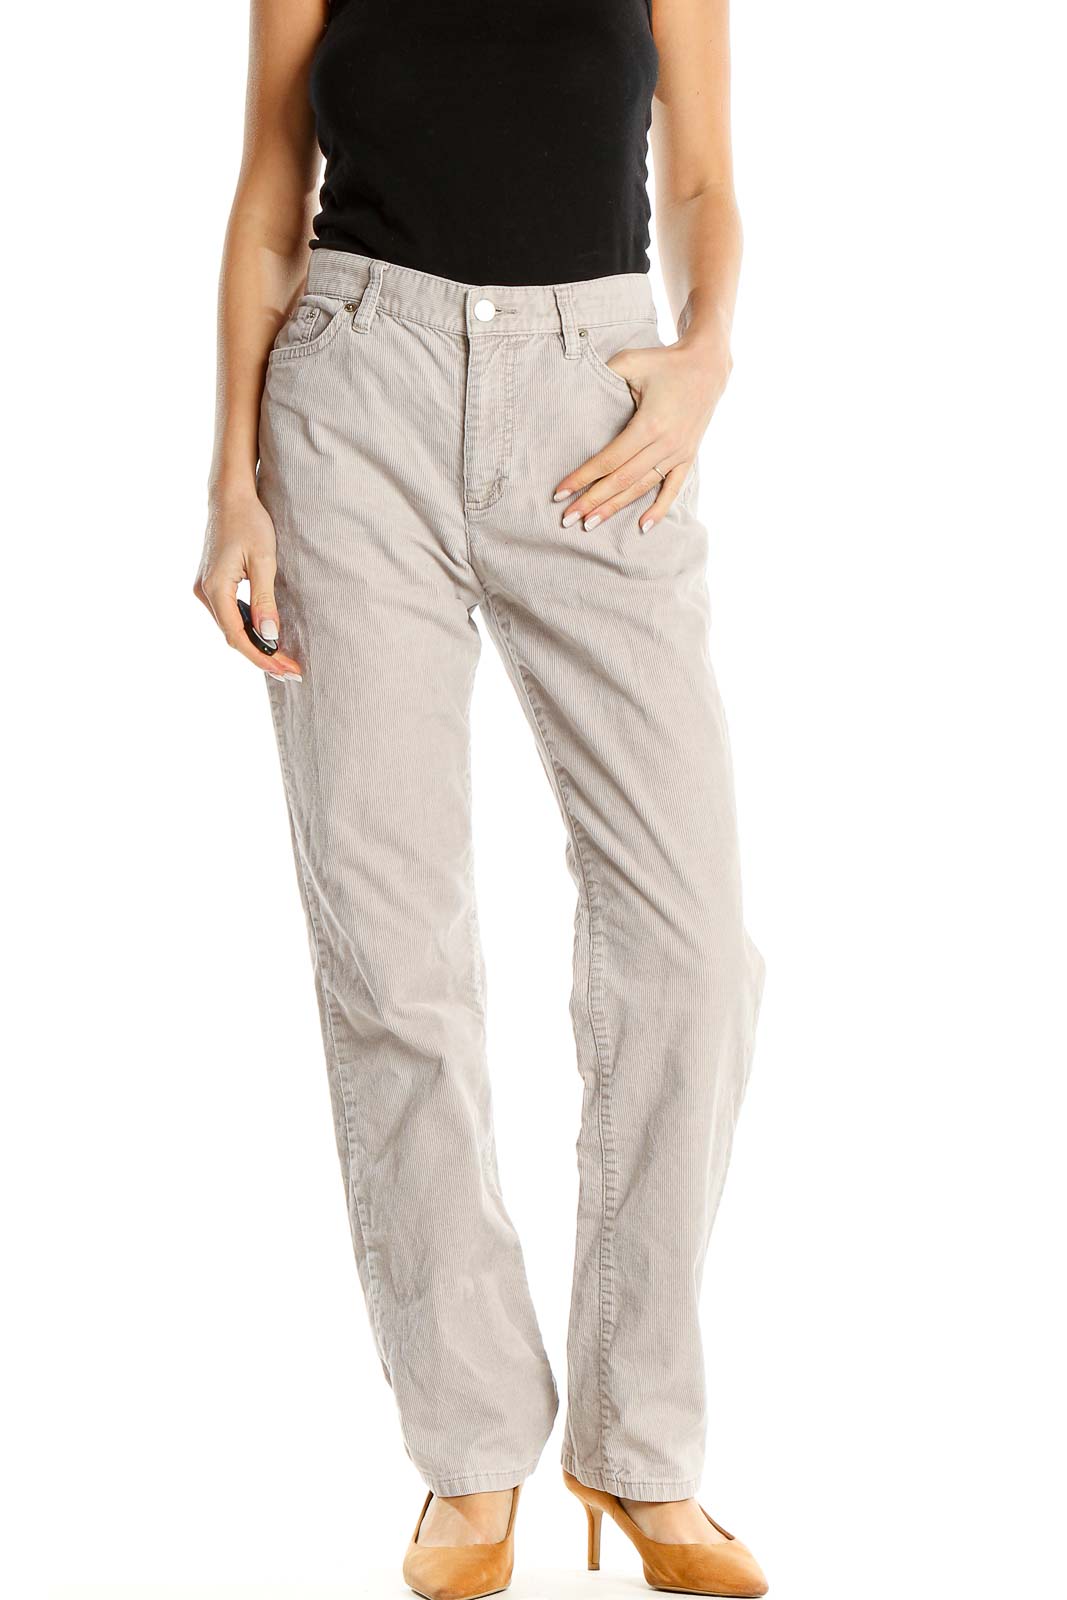 Gray Corduroy Jeans Front